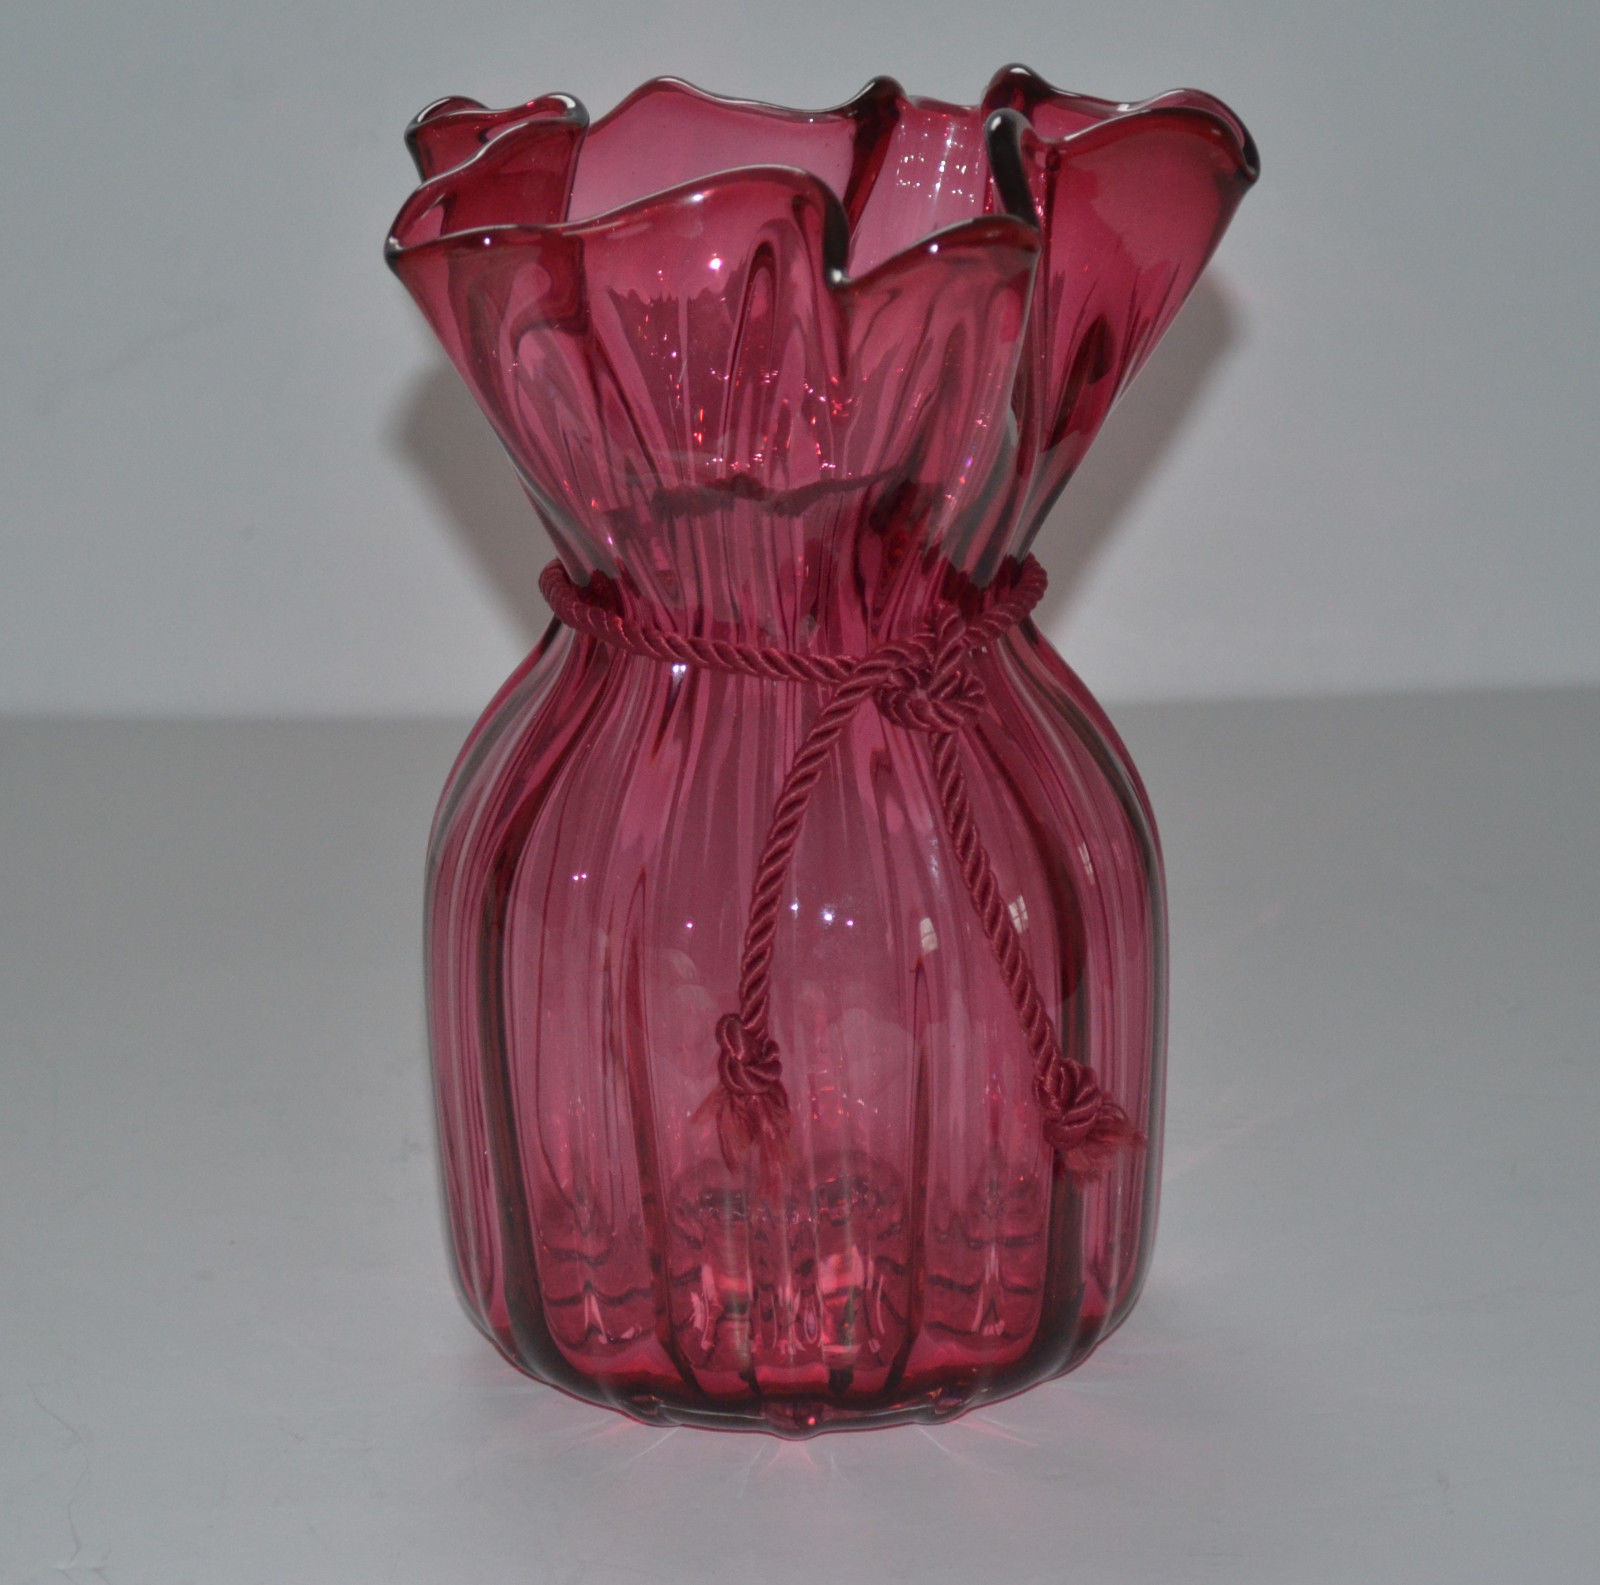 21 attractive Pilgrim Cranberry Glass Vase 2024 free download pilgrim cranberry glass vase of vintage pilgrim cranberry glass vase satin cord 60 00 picclick pertaining to vintage pilgrim cranberry glass vase satin cord 1 of 4only 1 available